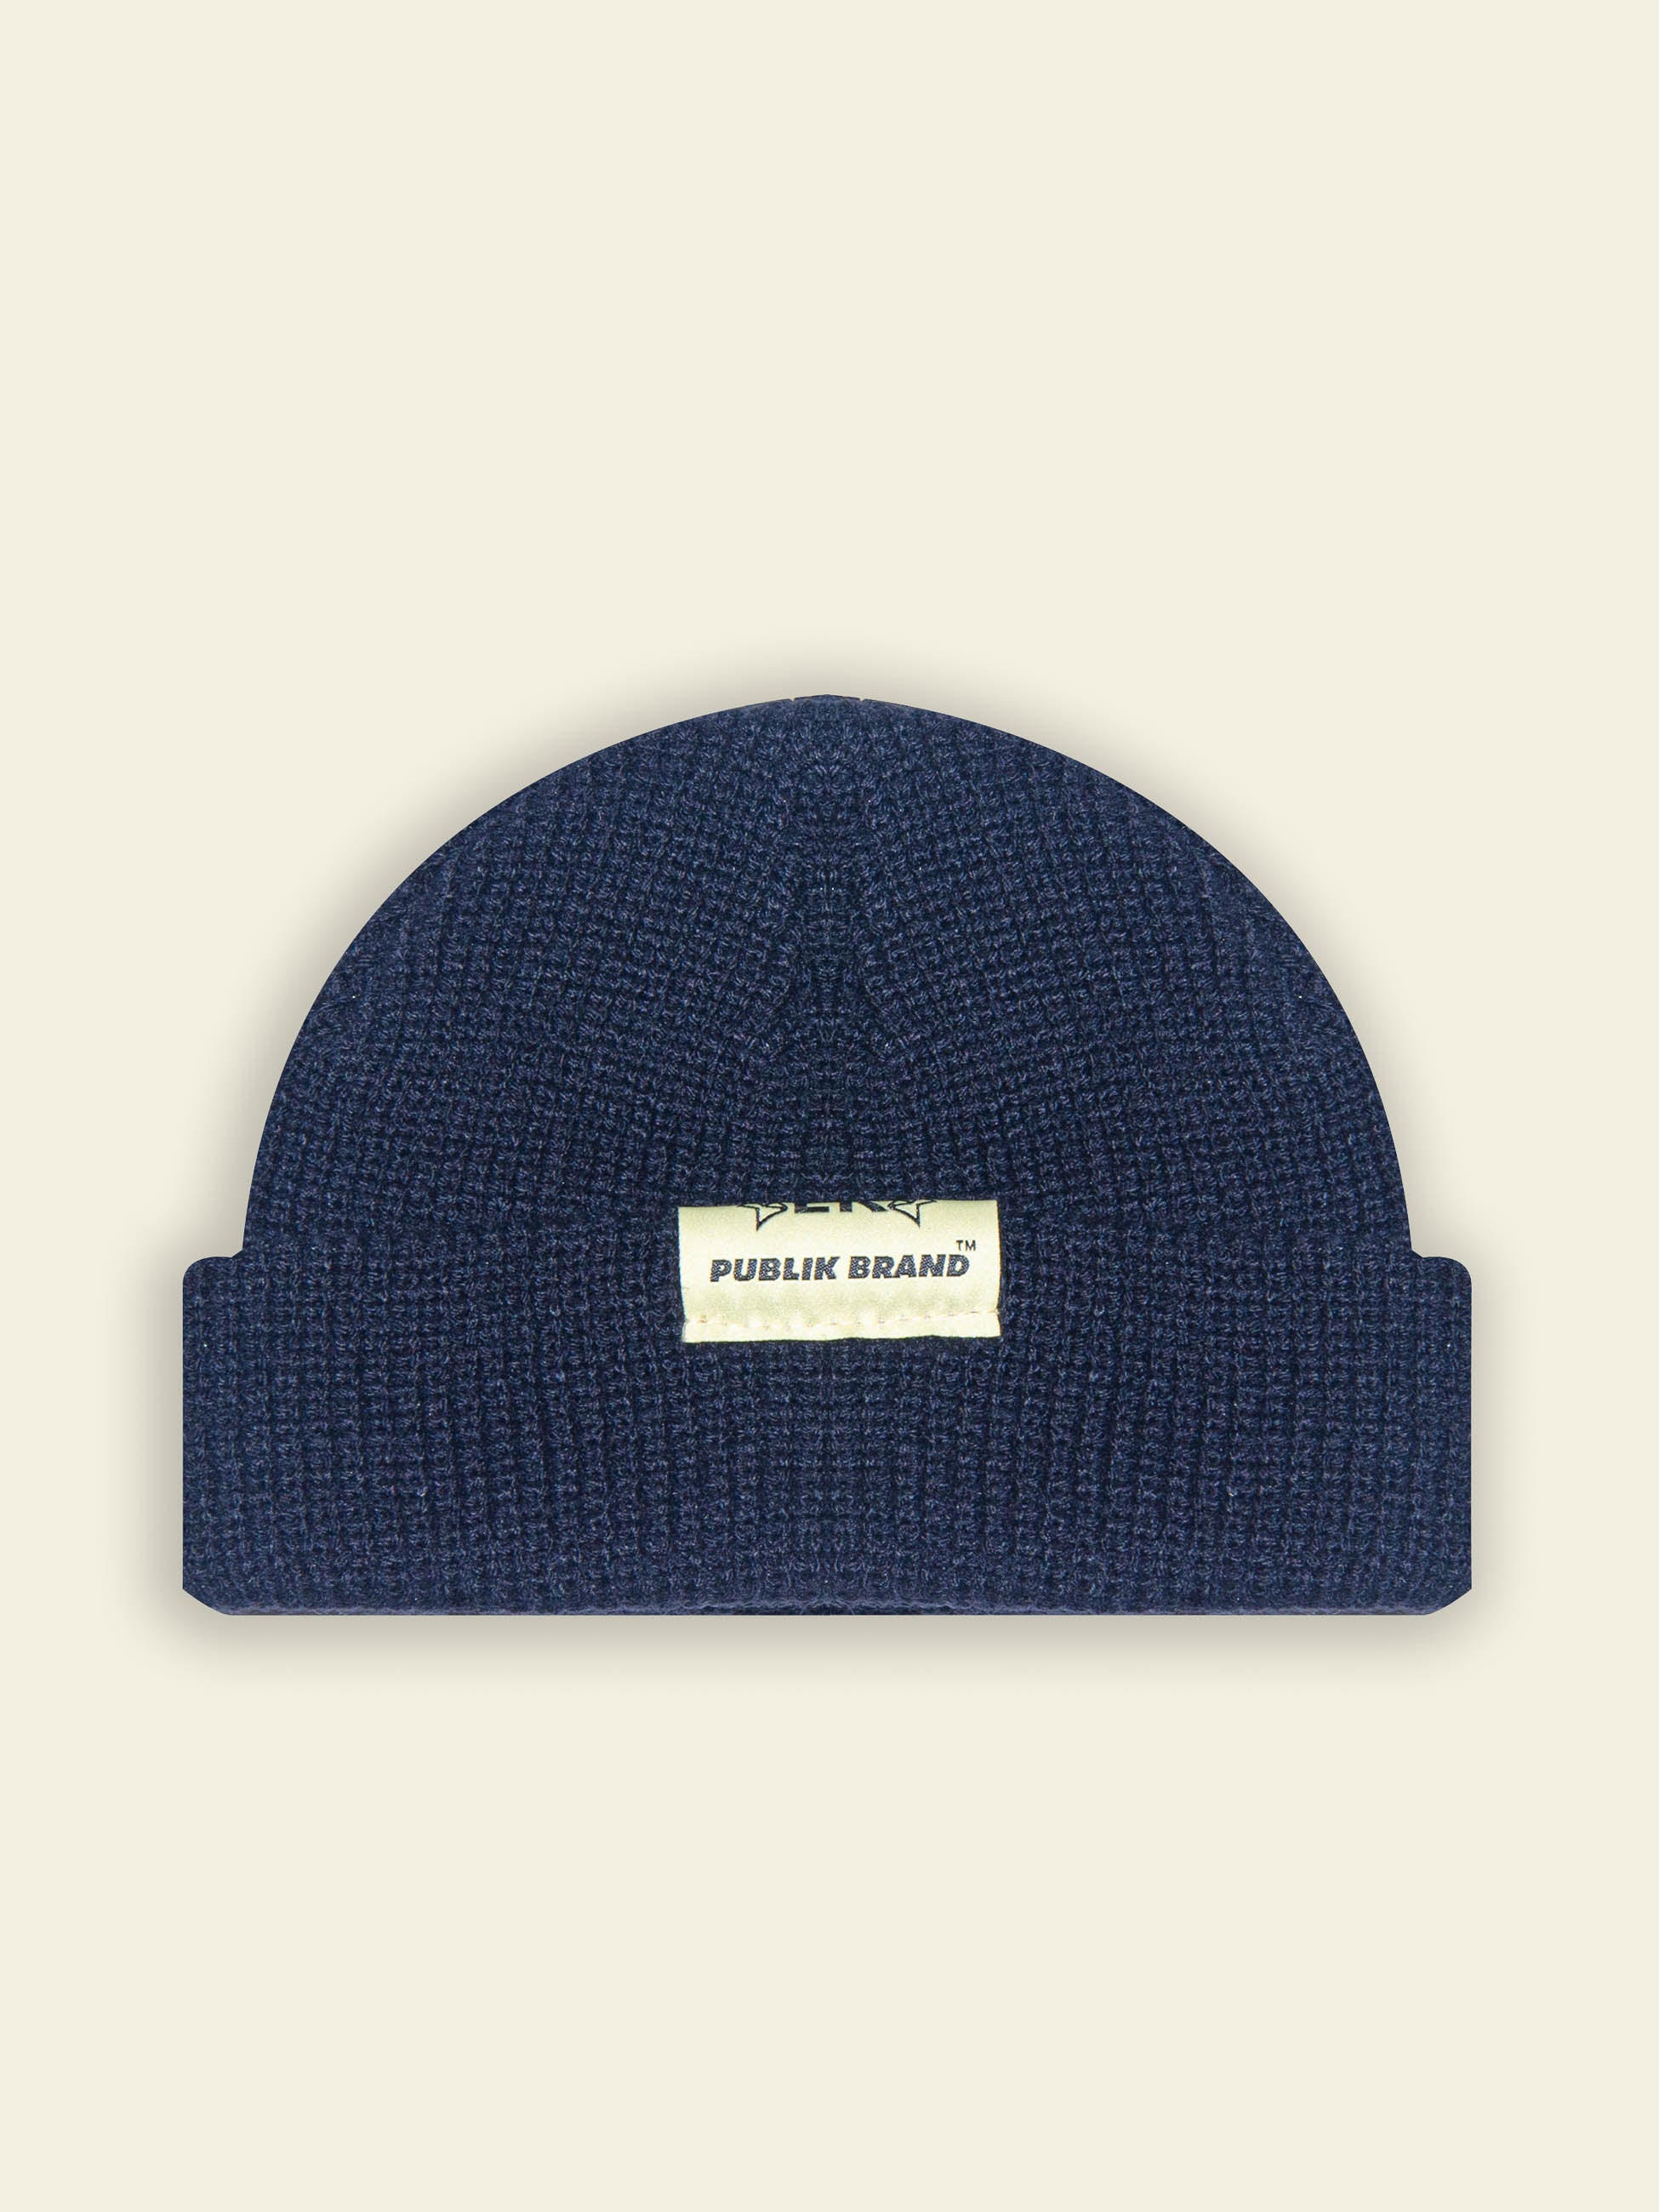 Publik Brand Fisherman Beanie College Navy, all made in USA, Back